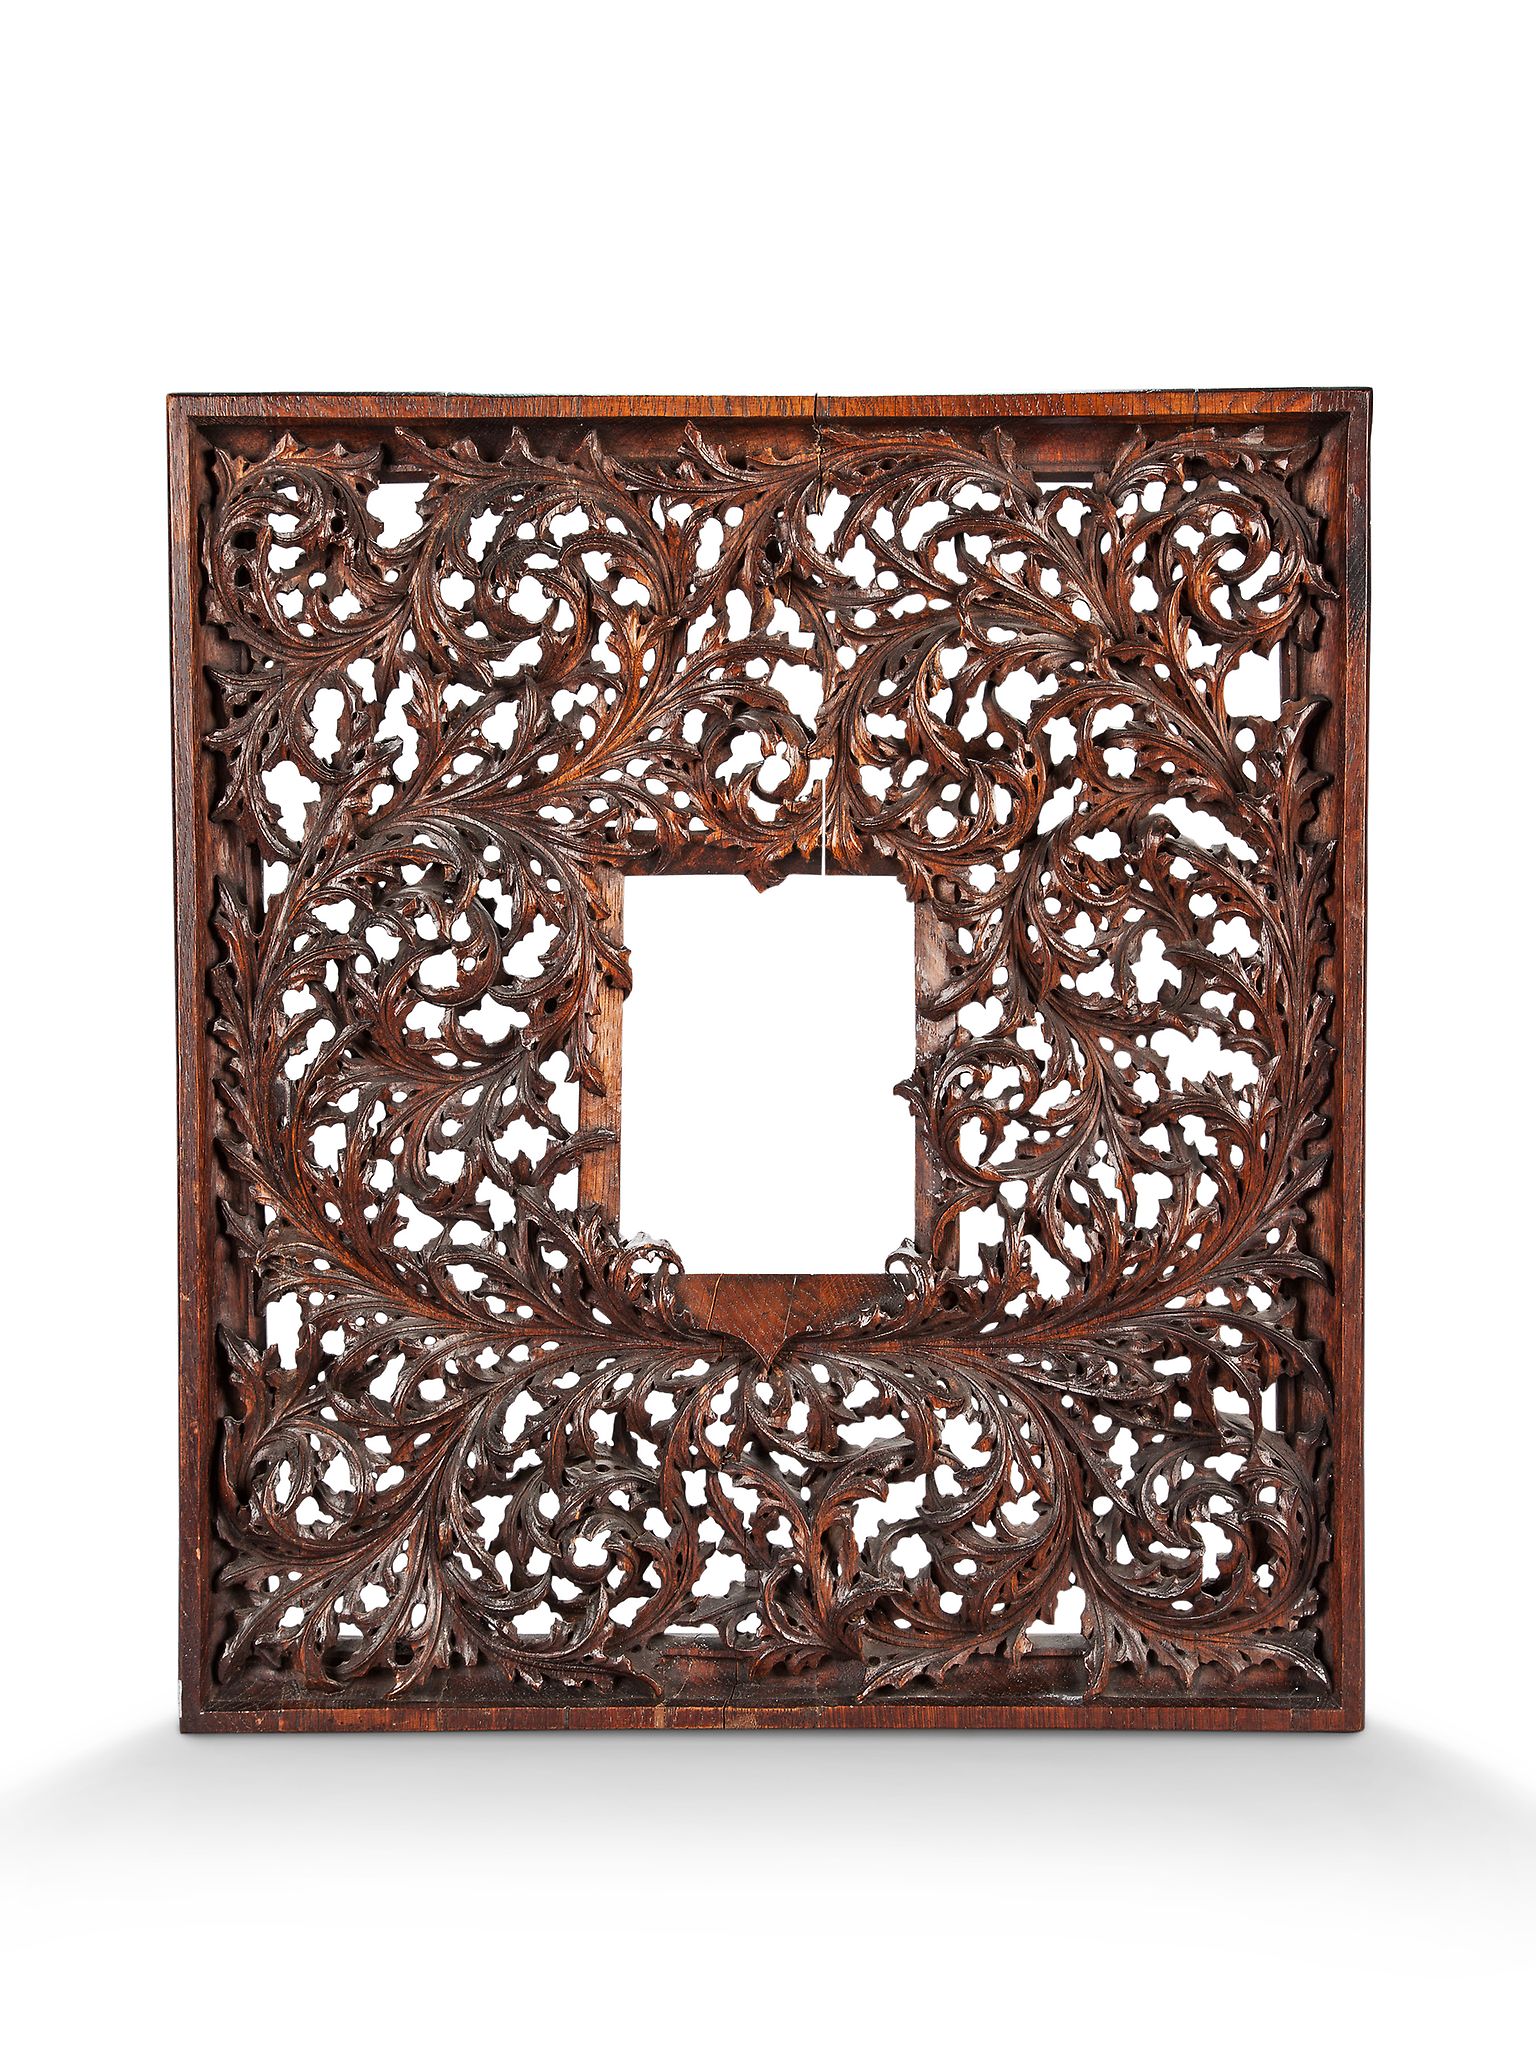 A 17th French Century Oak Frame the profusely carved frame with stylised interwoven foliate